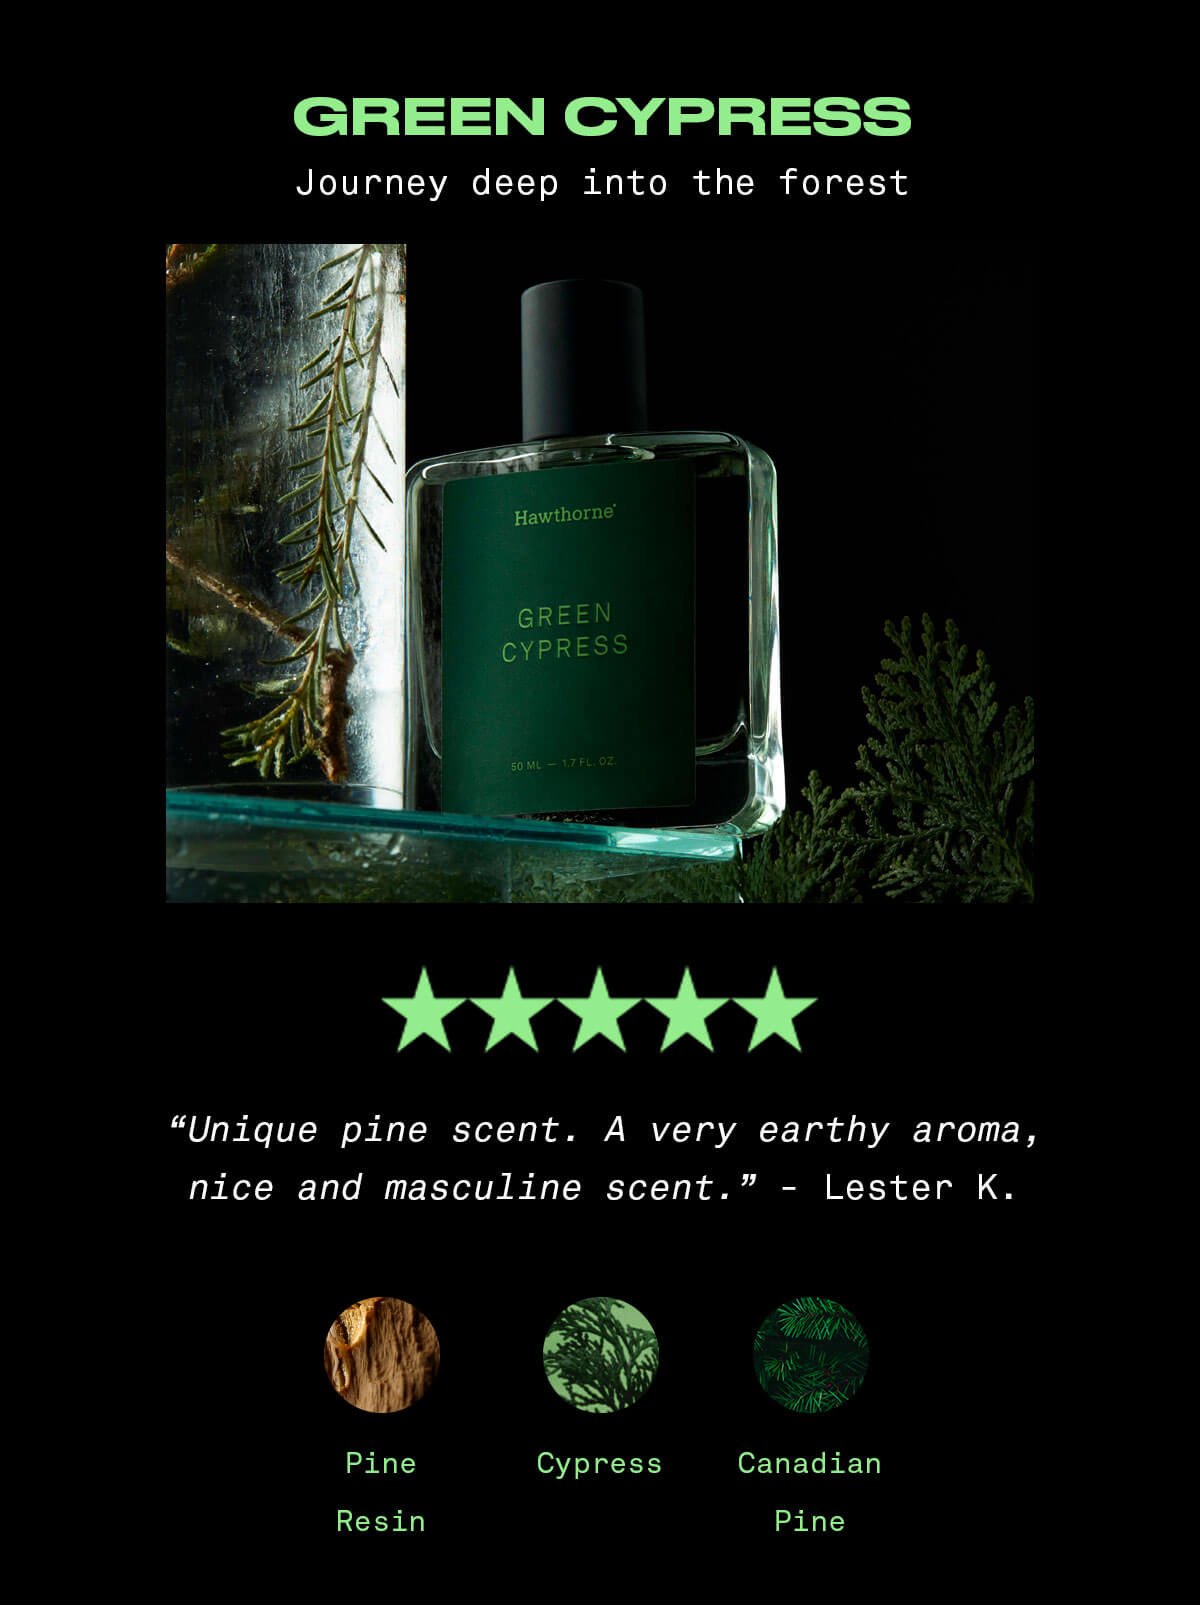 Green Cypress Journey deep into the forest ⭐️⭐️⭐️⭐️⭐️ “Unique pine scent. A very earthy aroma, nice and masculine scent.” - Lester K. Cypress, Pine Resin, Canadian pine